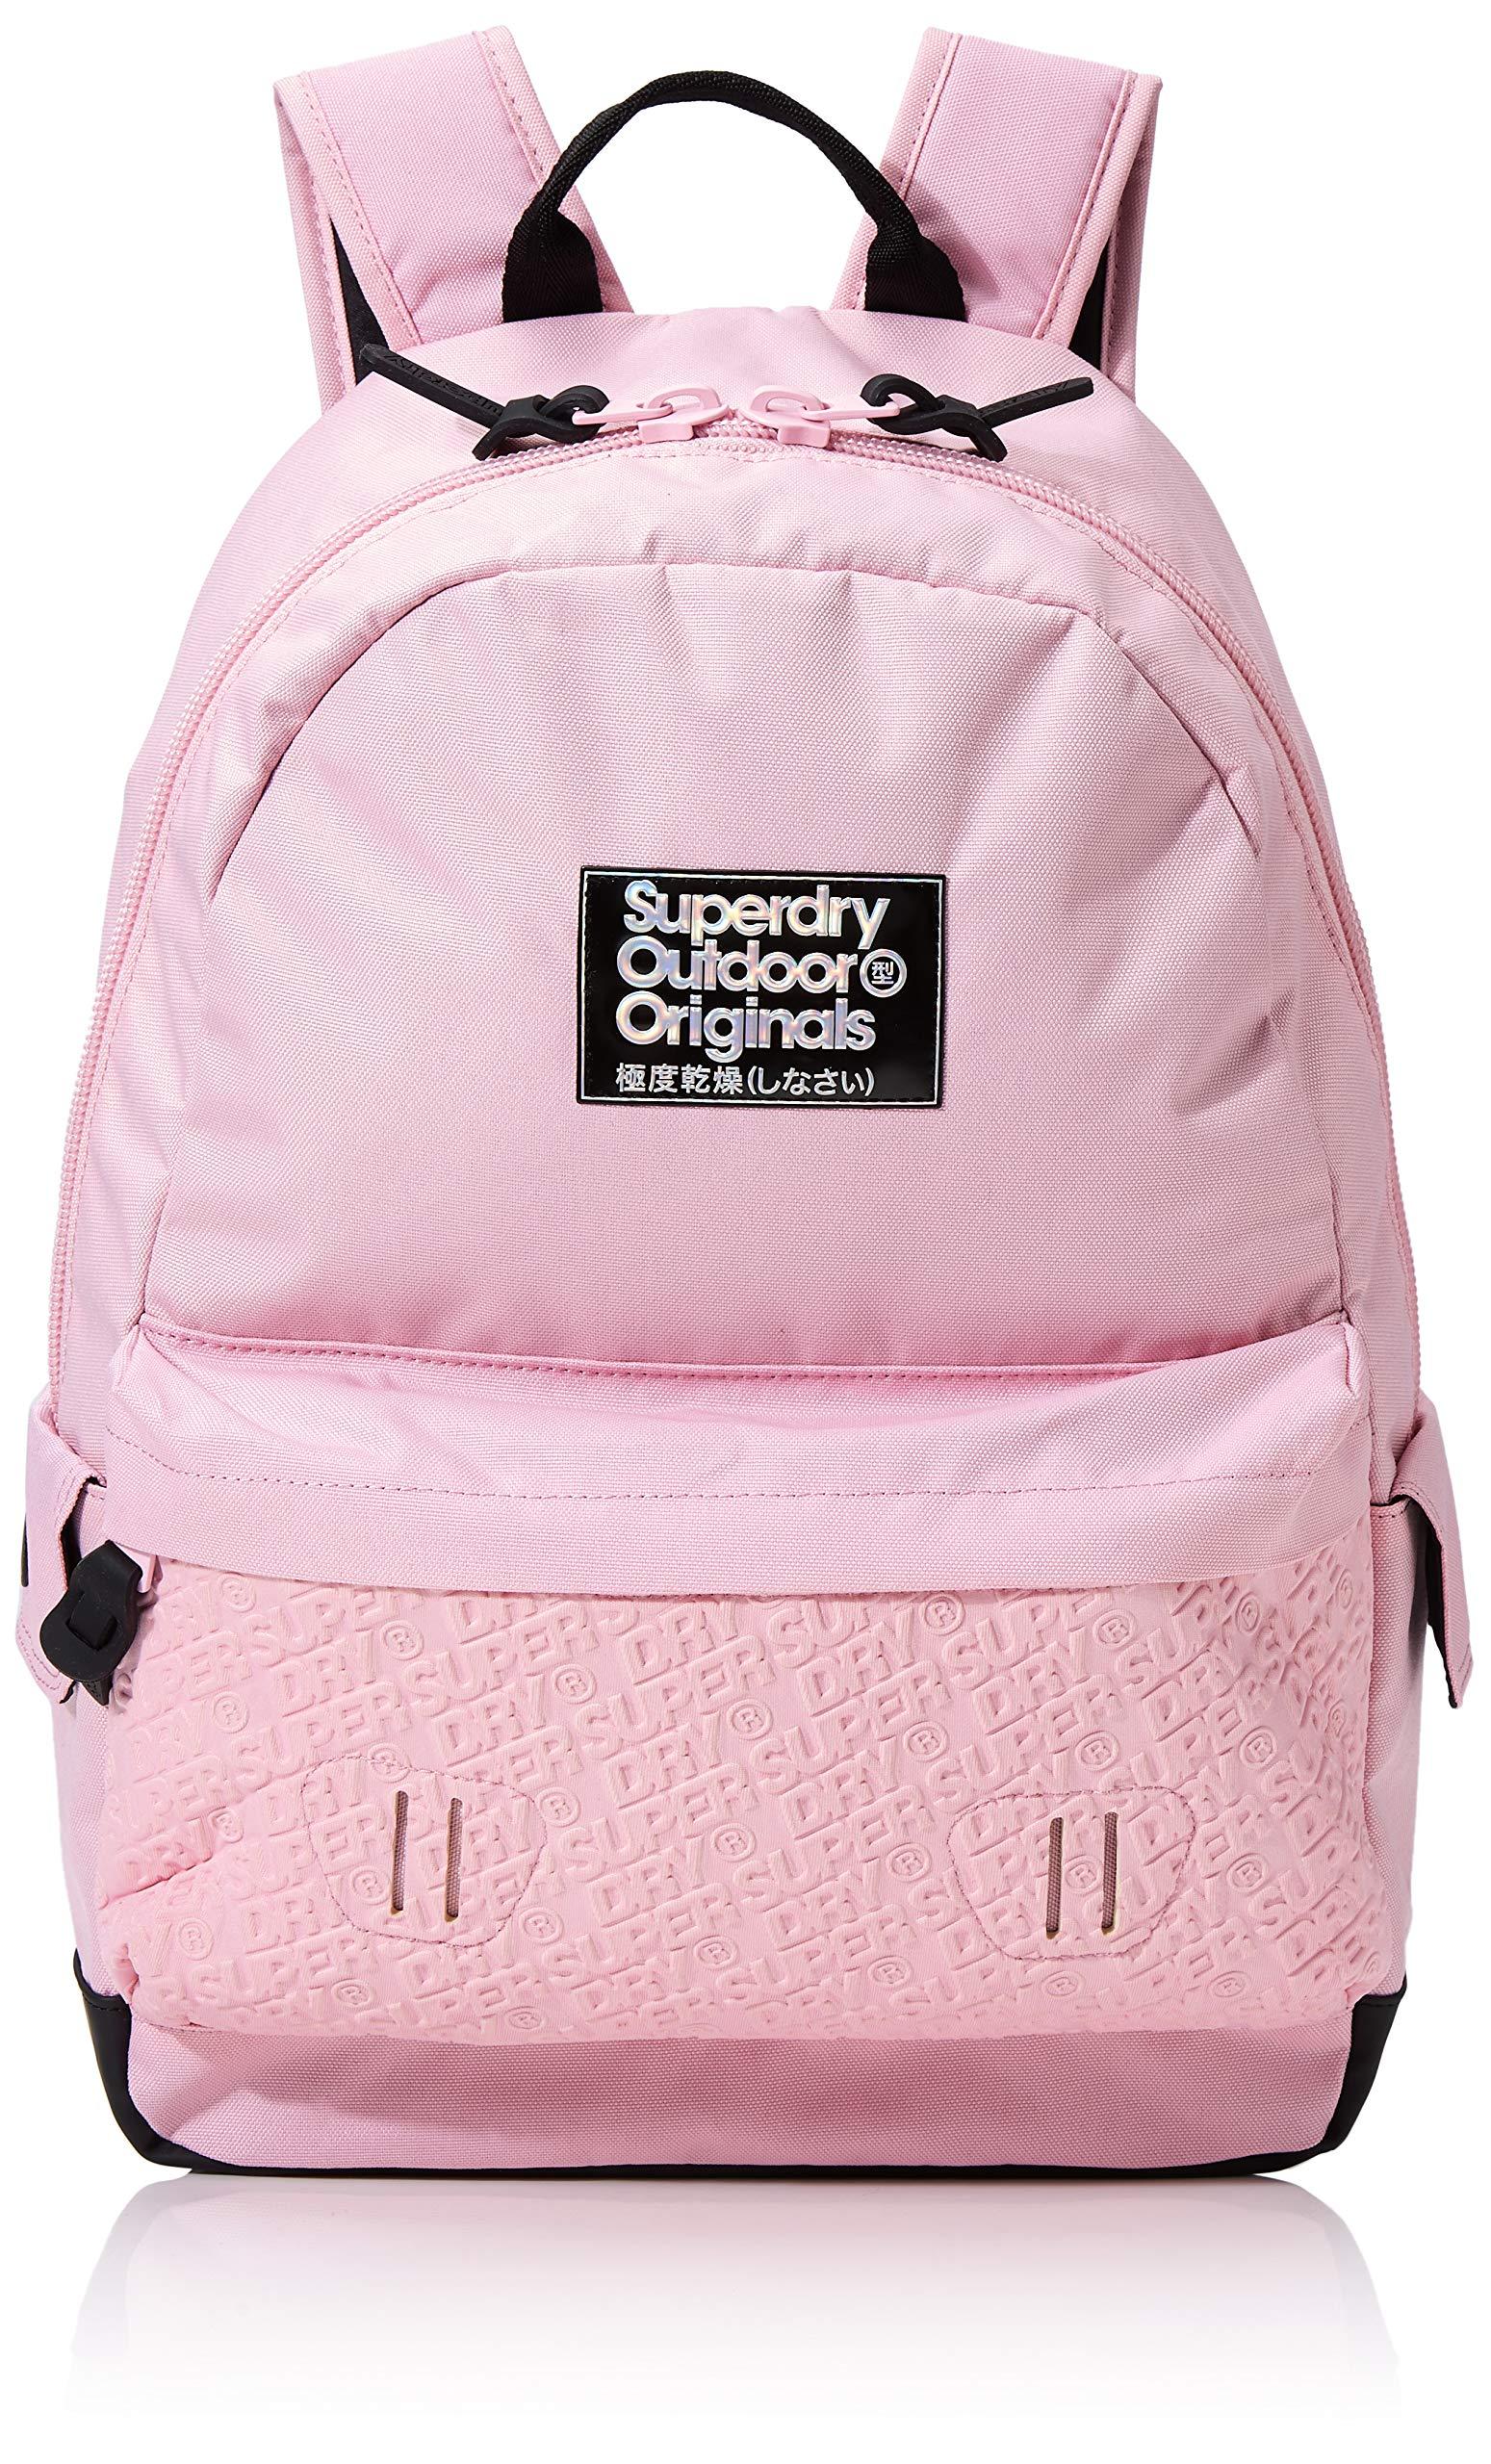 Superdry Backpack Pink Clearance, 54% OFF | www.kayakerguide.com